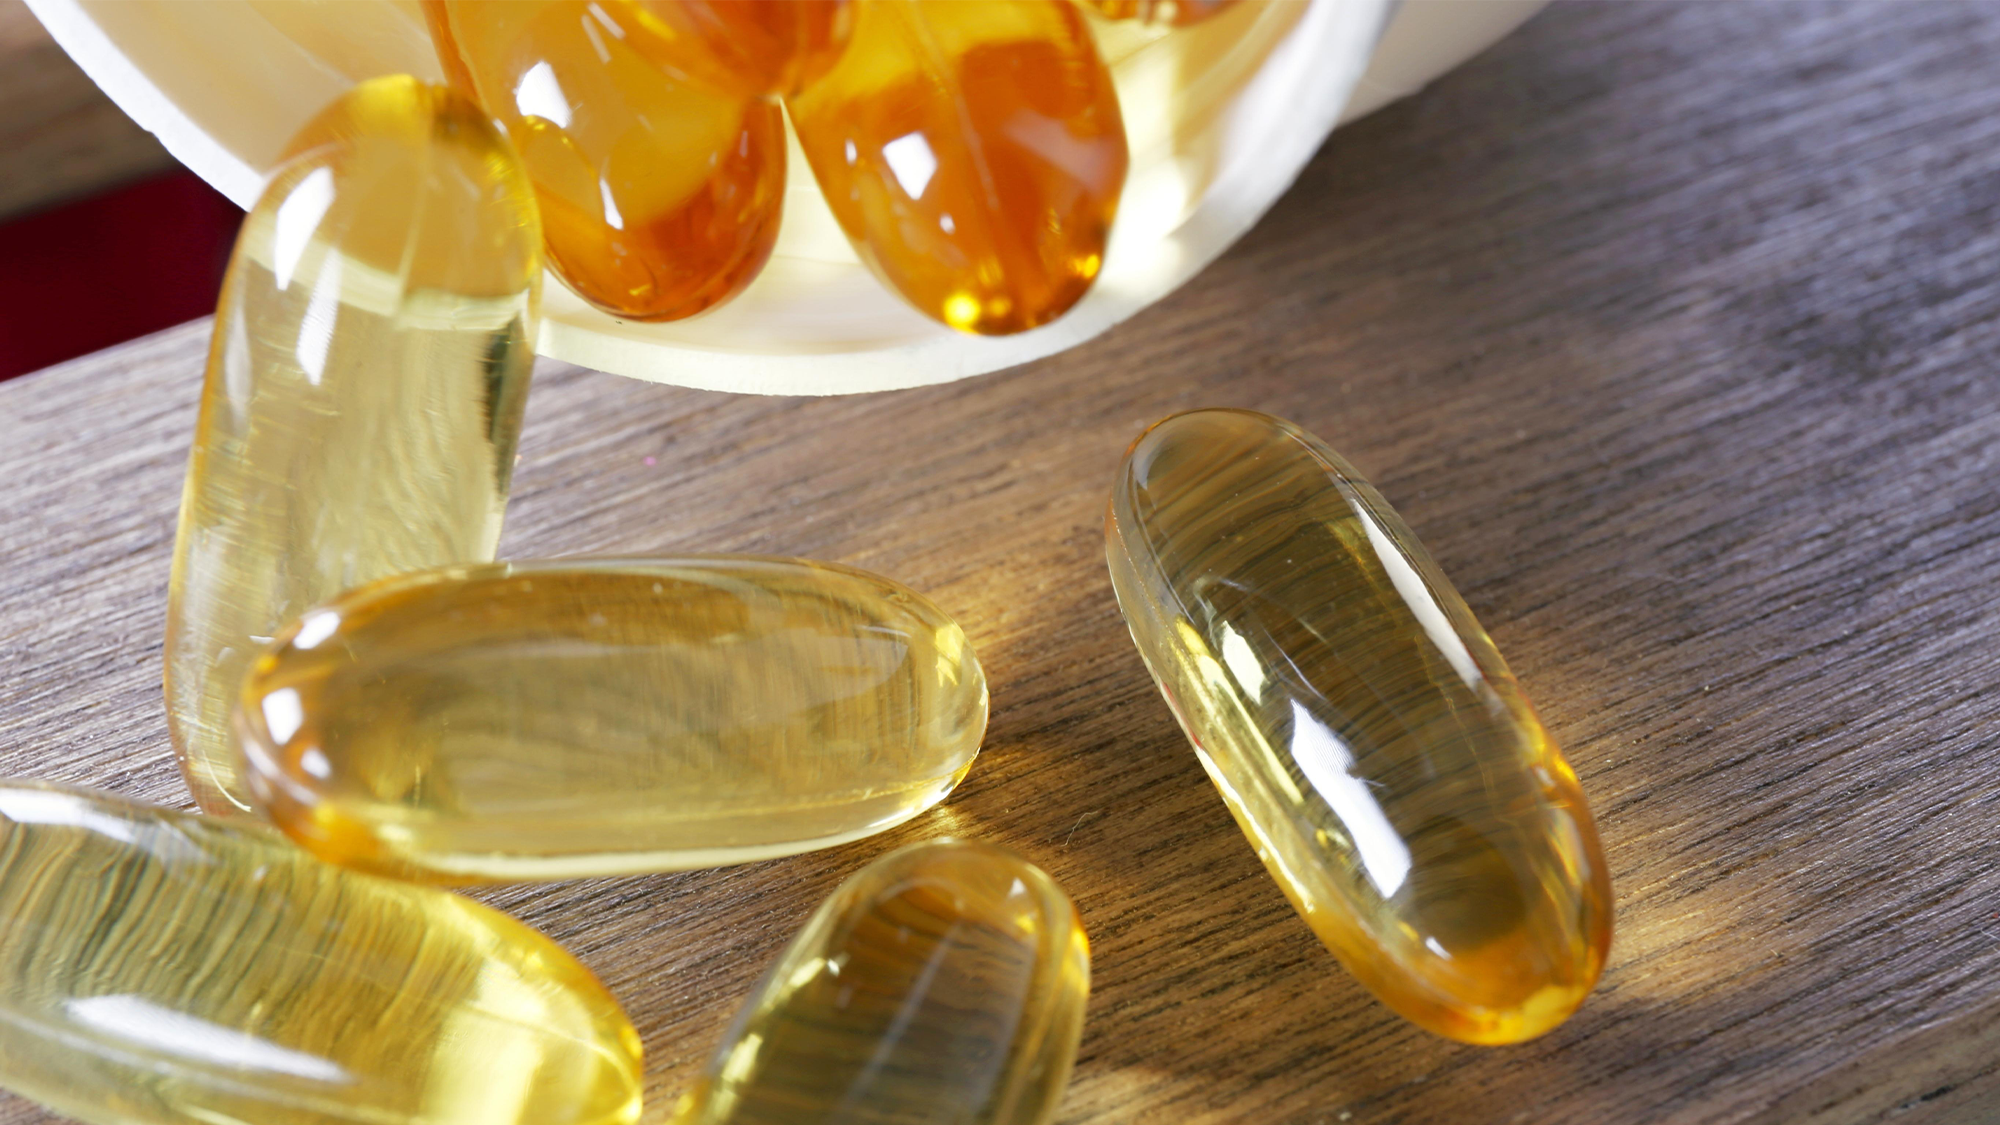 Fish oil supplements might still not be as good as the real thing